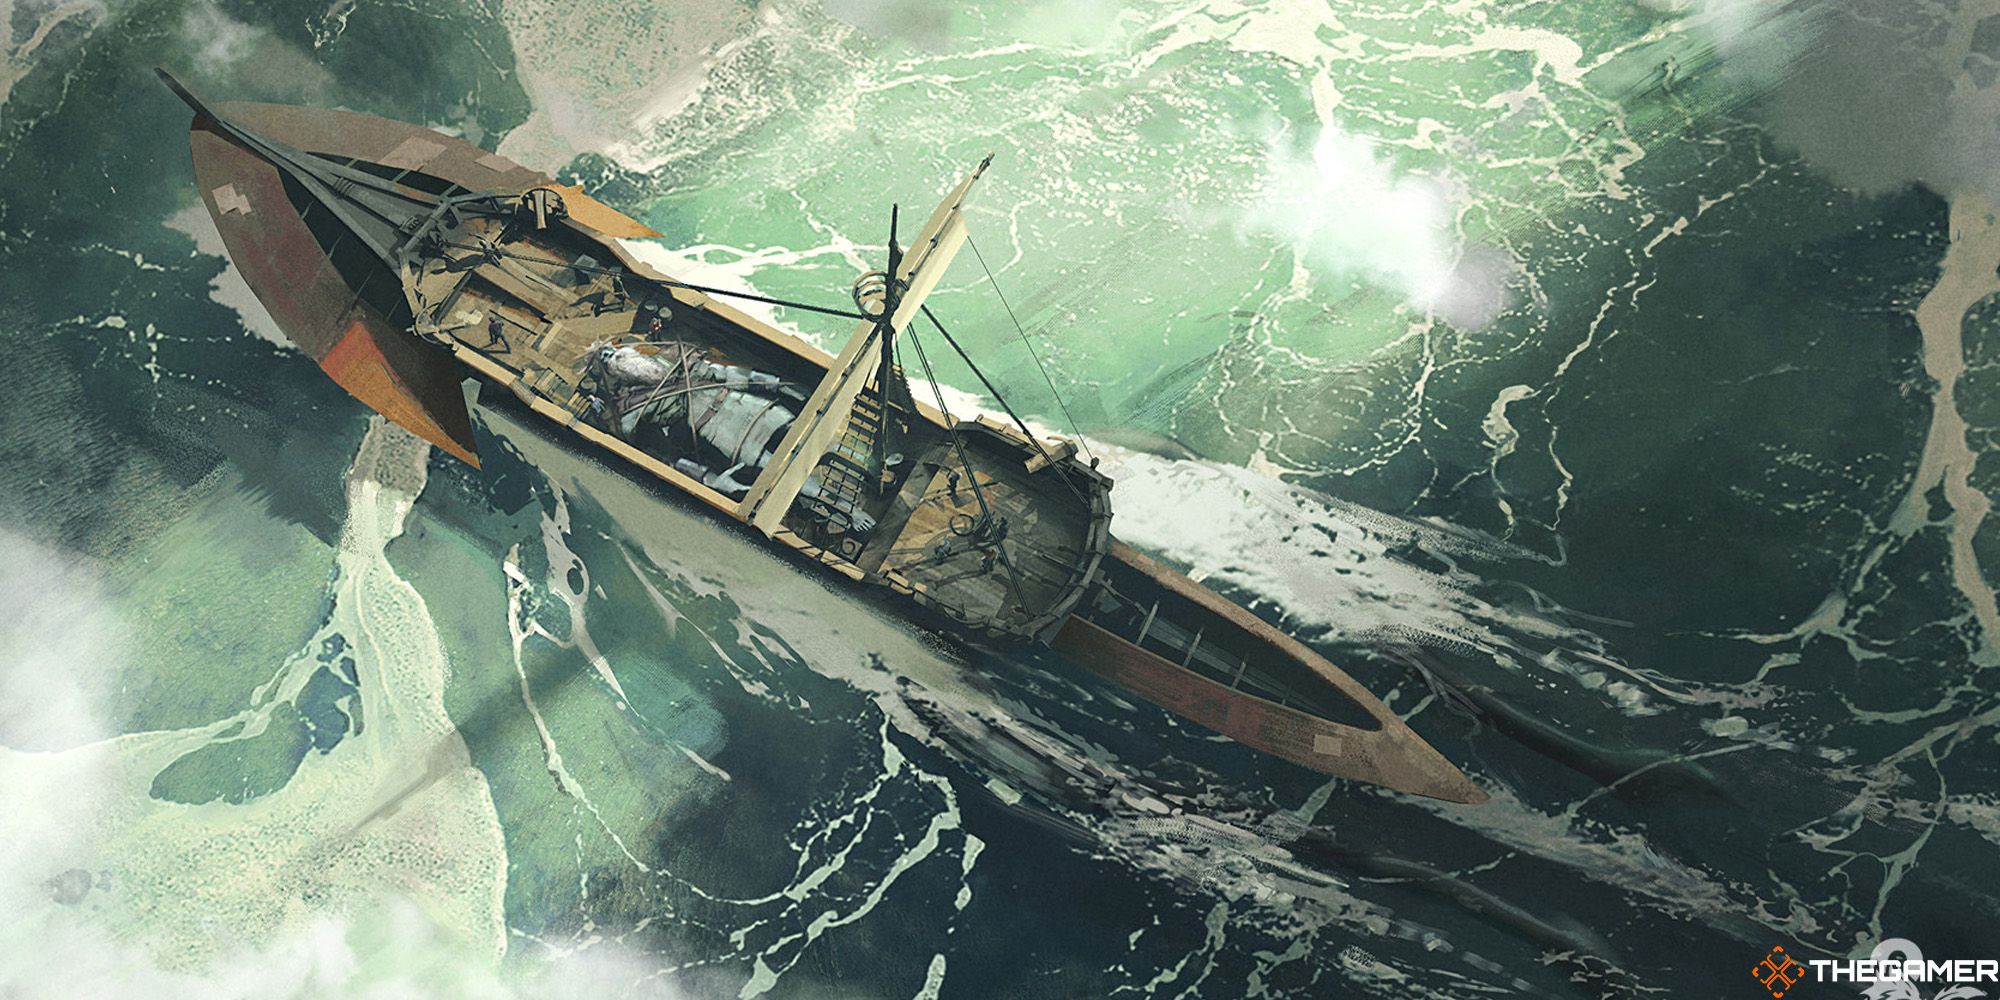 The Morkoth ship by Jedd Chevrier sailing on a green-blue sea with the sail down